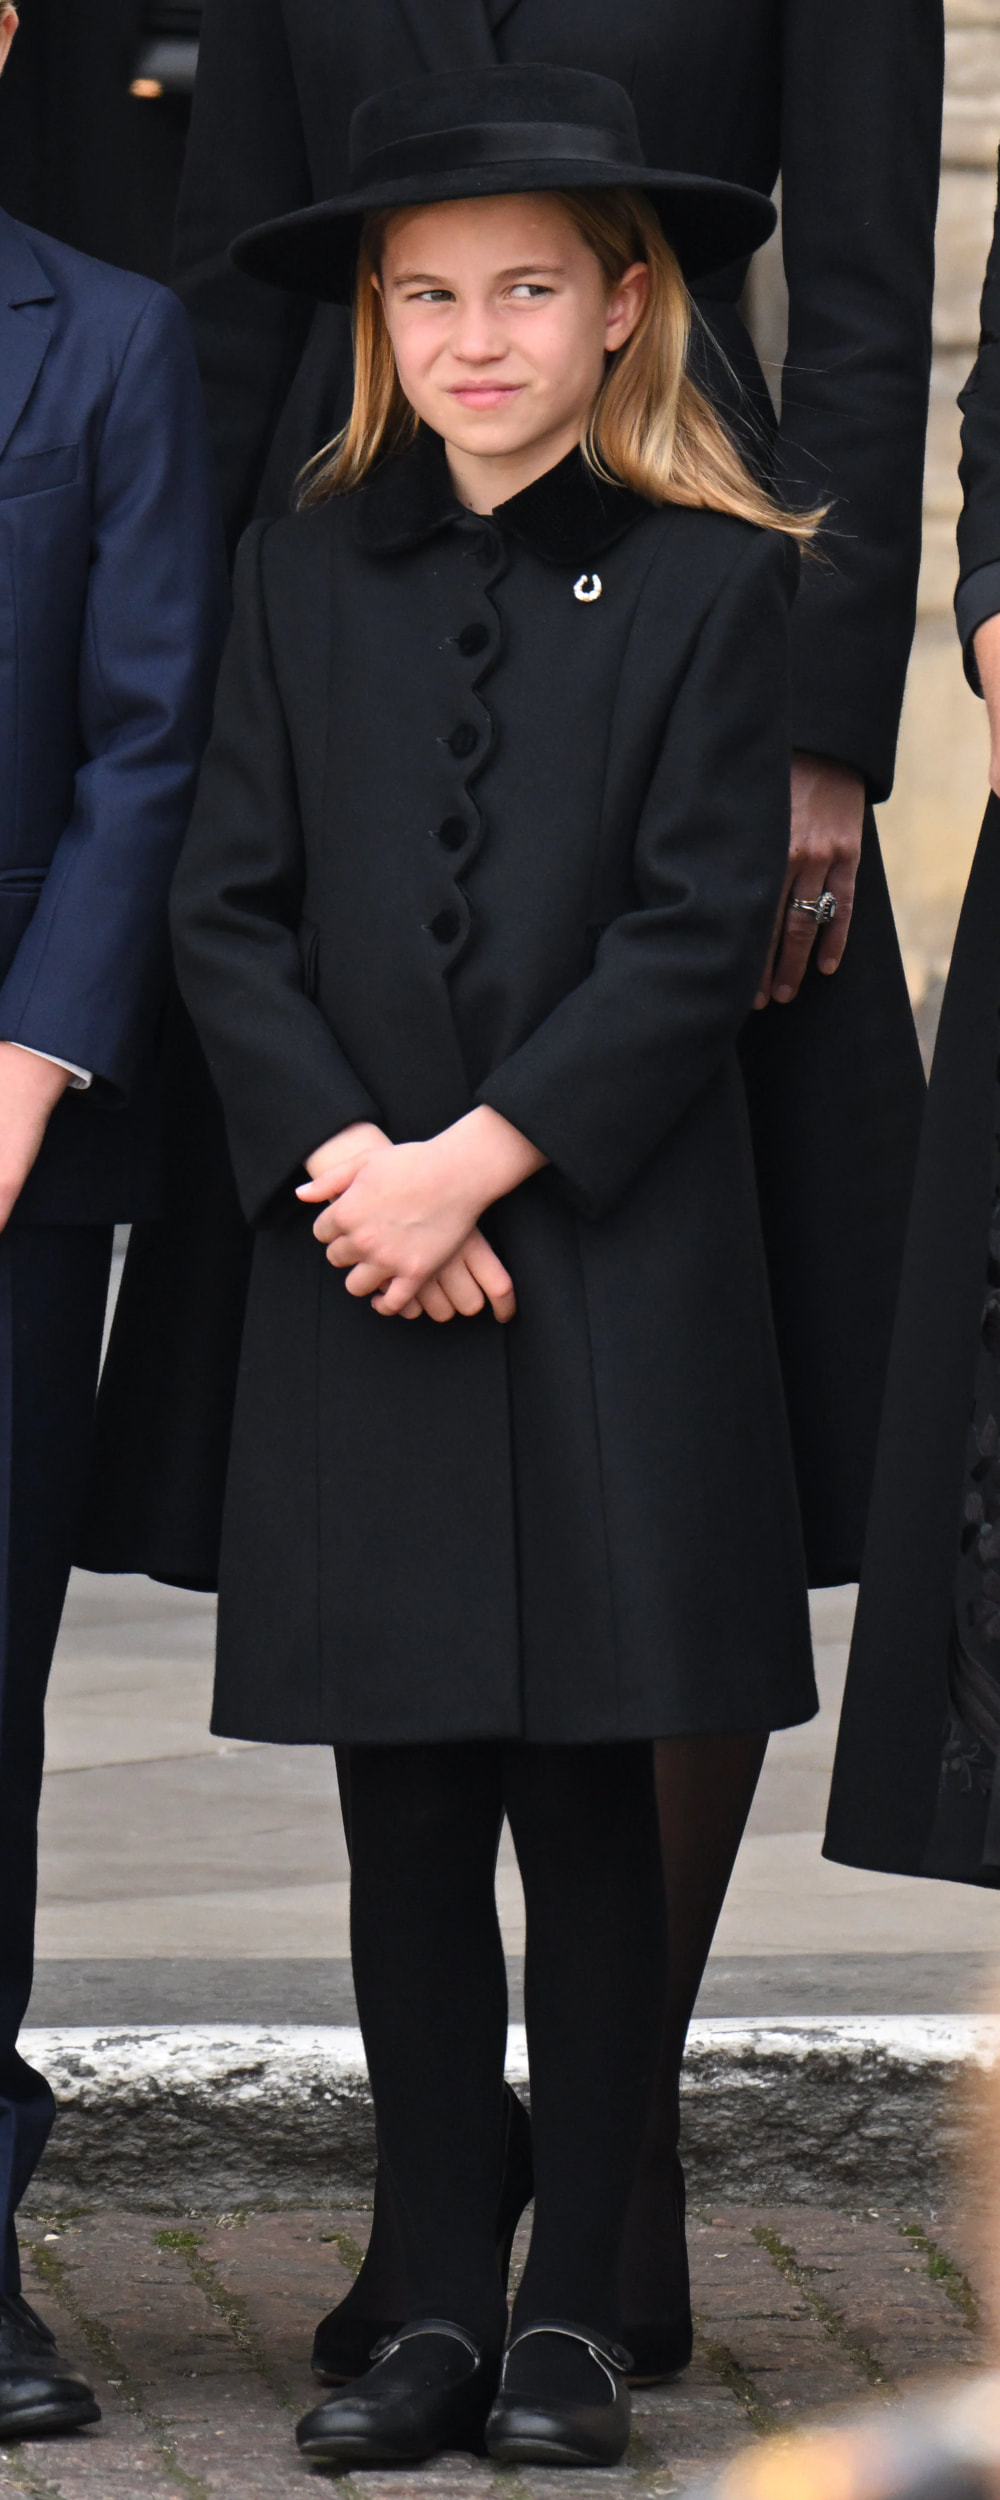 Princess Charlotte wears Jane Taylor Child's Classic Boater Hat in Black